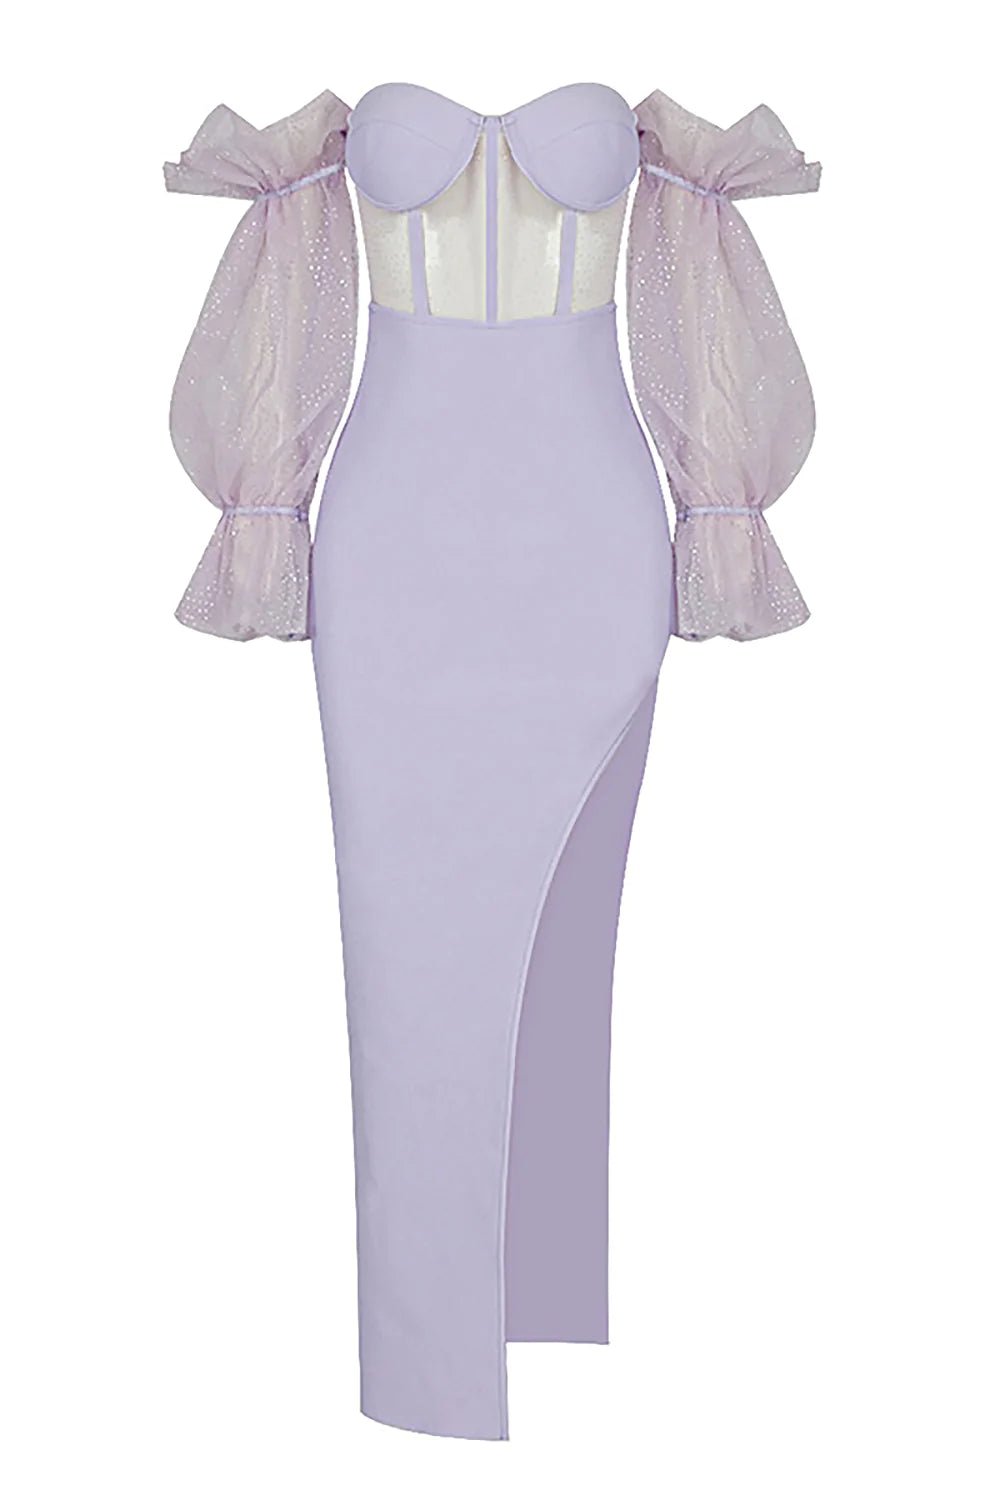 Lilac Bandage Shaping Puff'd Dress - Expressive Boutique